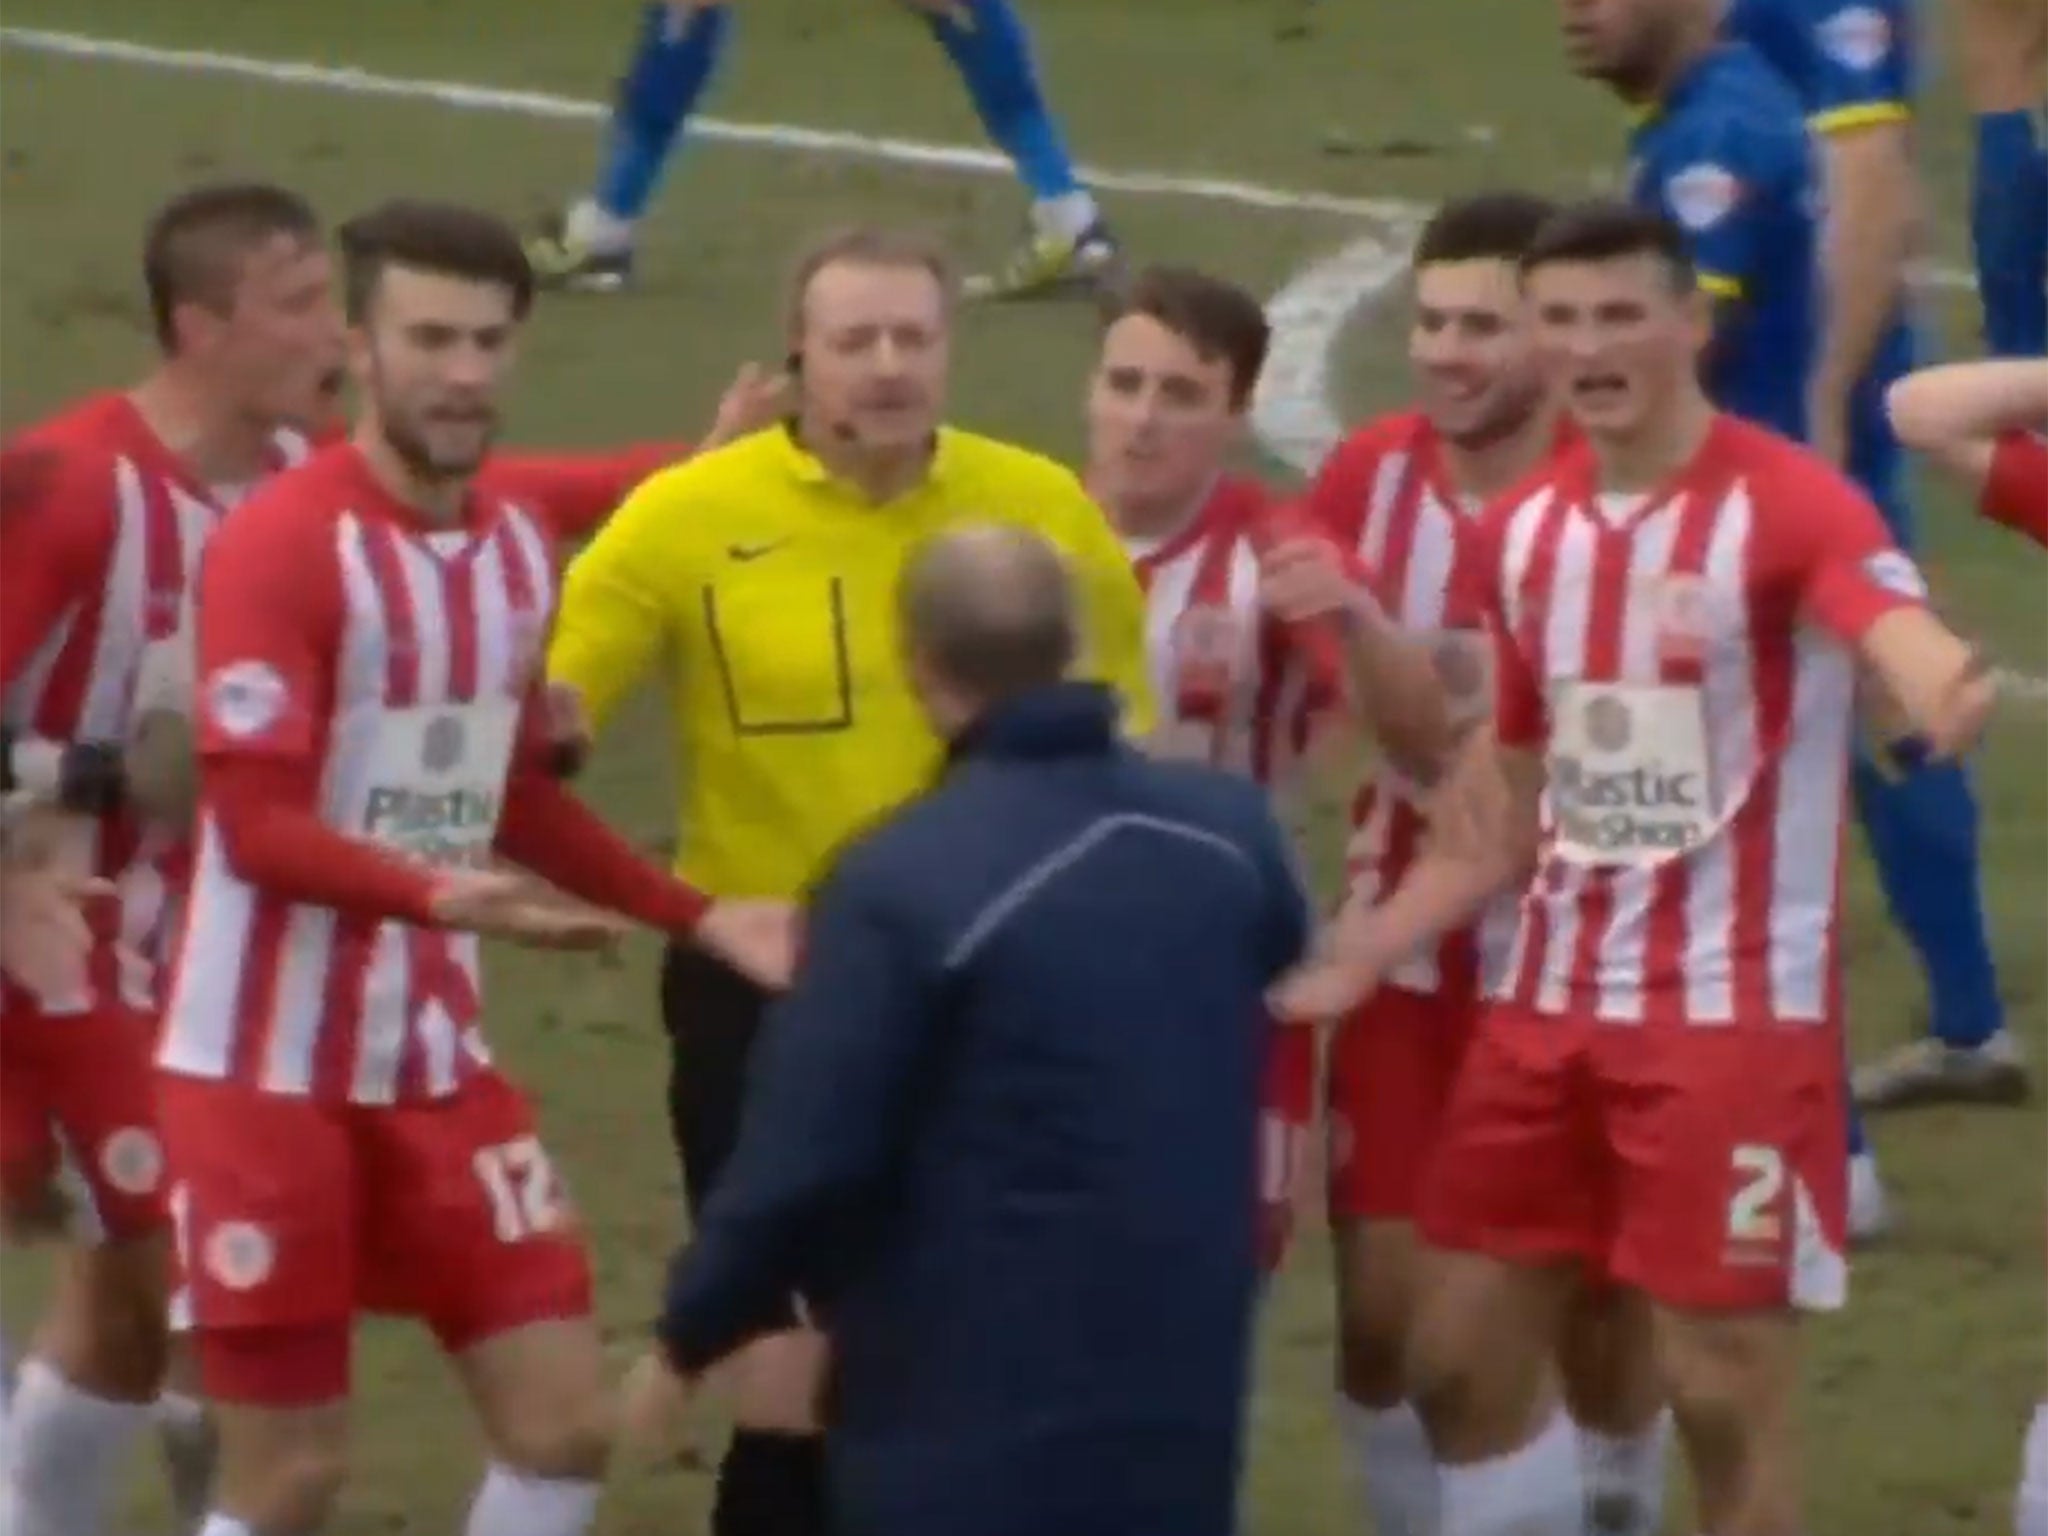 The Accrington players surround the referee to protest as manager John Coleman attempts to calm them